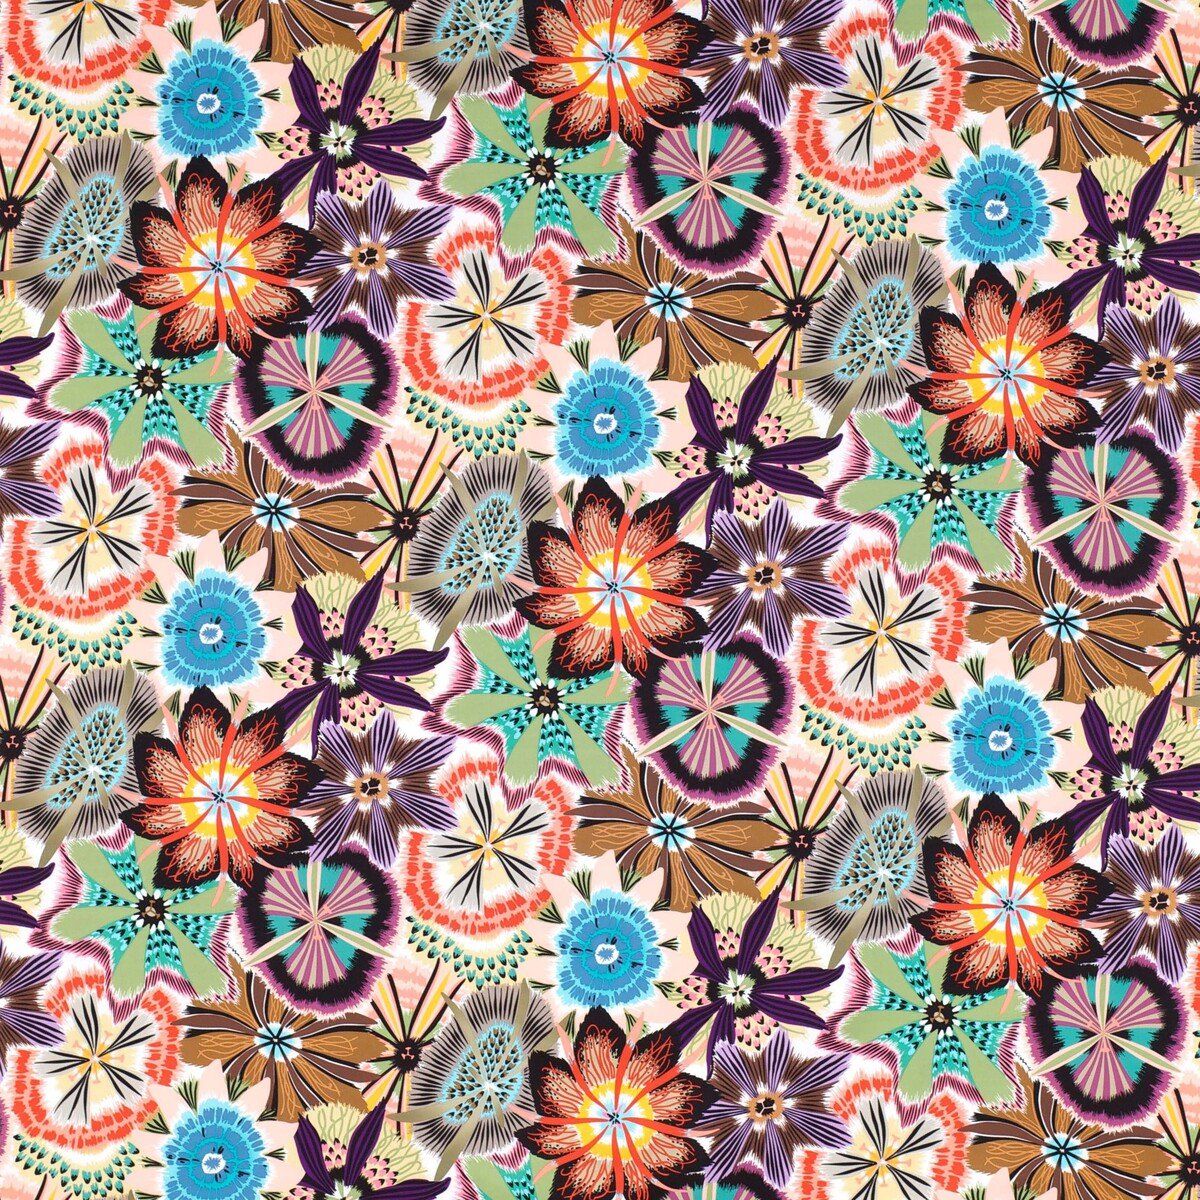 Buy Kravet Couture Fabric Missoni Multipurpose T Home 36181-510 Passiflora Collection Yard the by